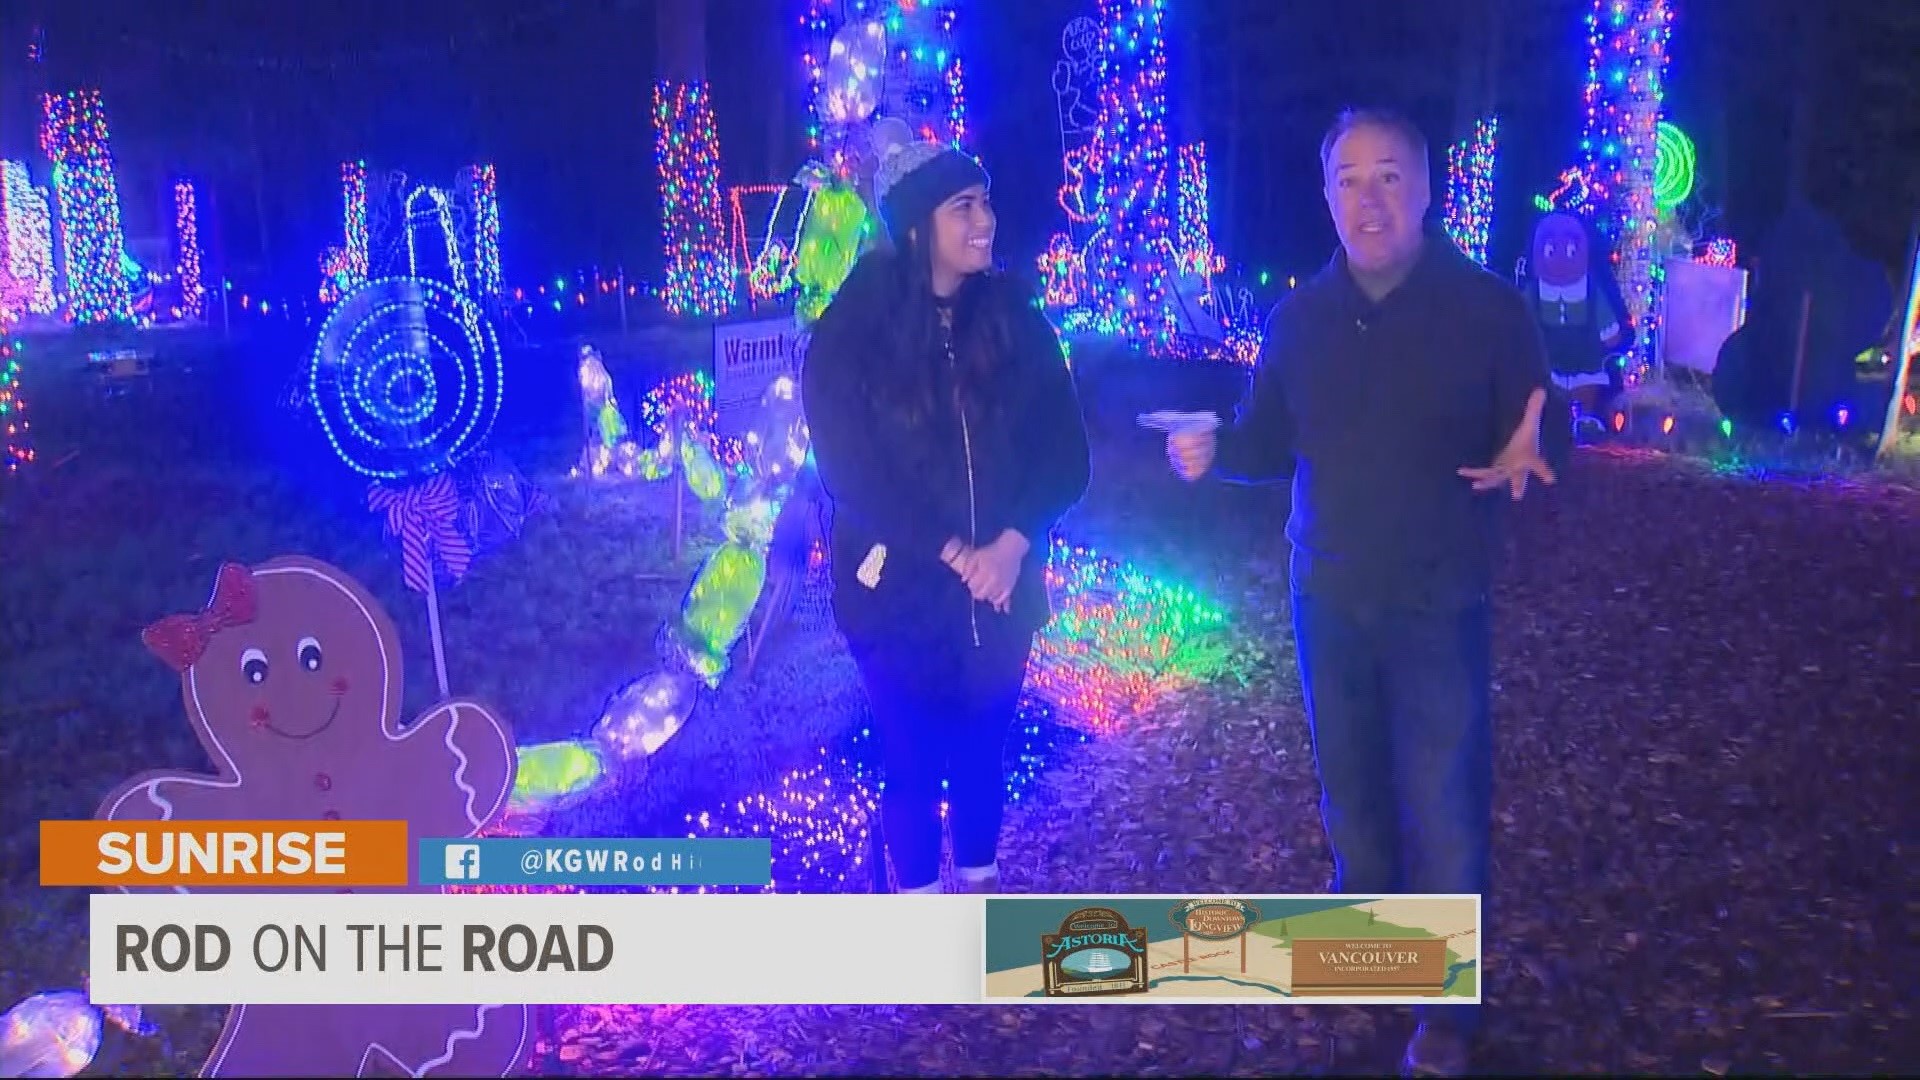 Rod on the Road took KGW meteorologist Rod Hill to the spectacular sights and sounds of Christmas in the Oregon Garden. The Silverton HS choir team performs as well.